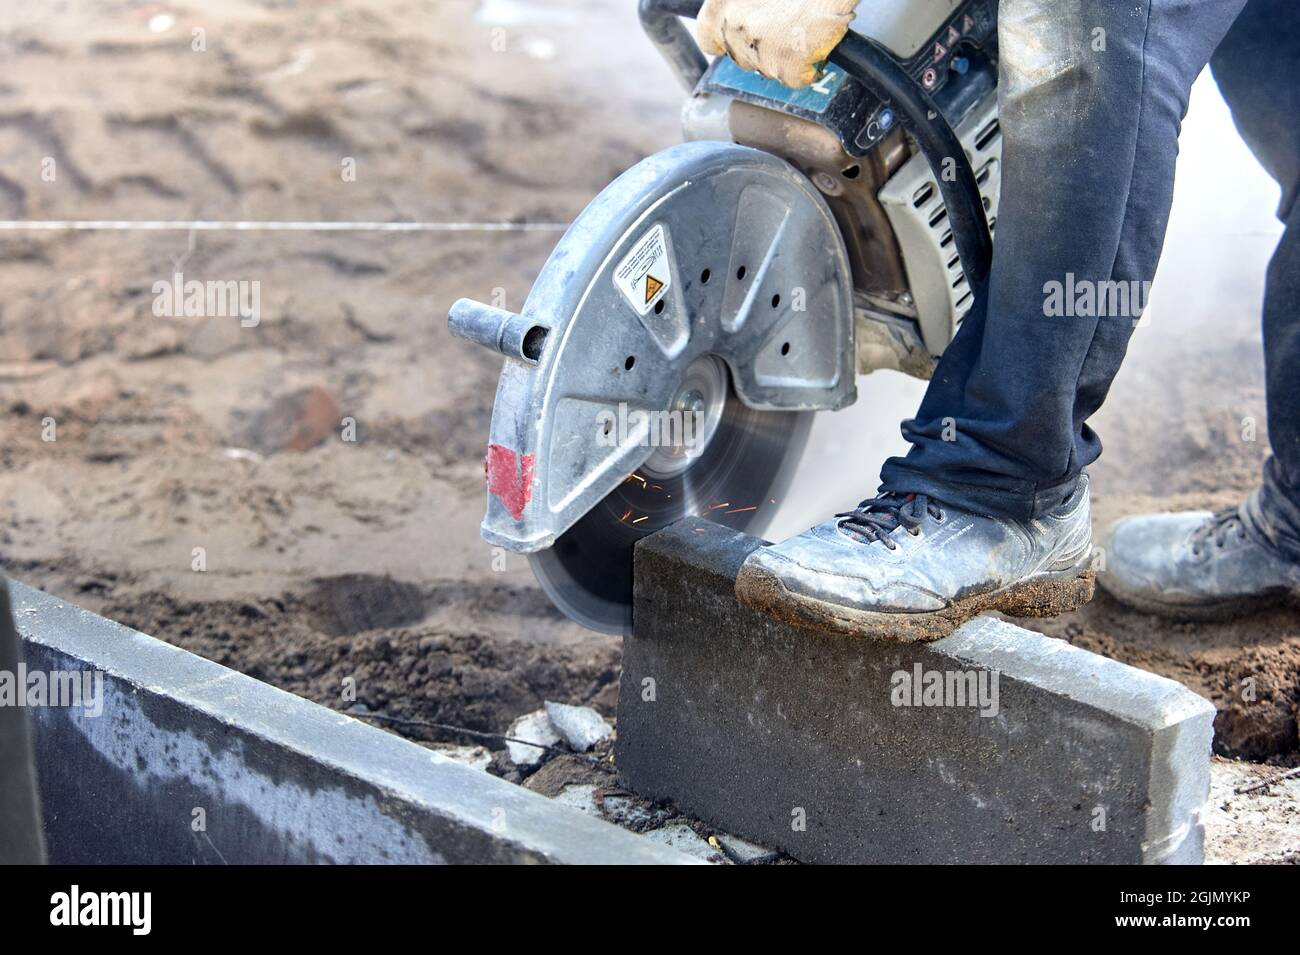 A worker with a circular saw cuts a curb stone close-up. Stock Photo